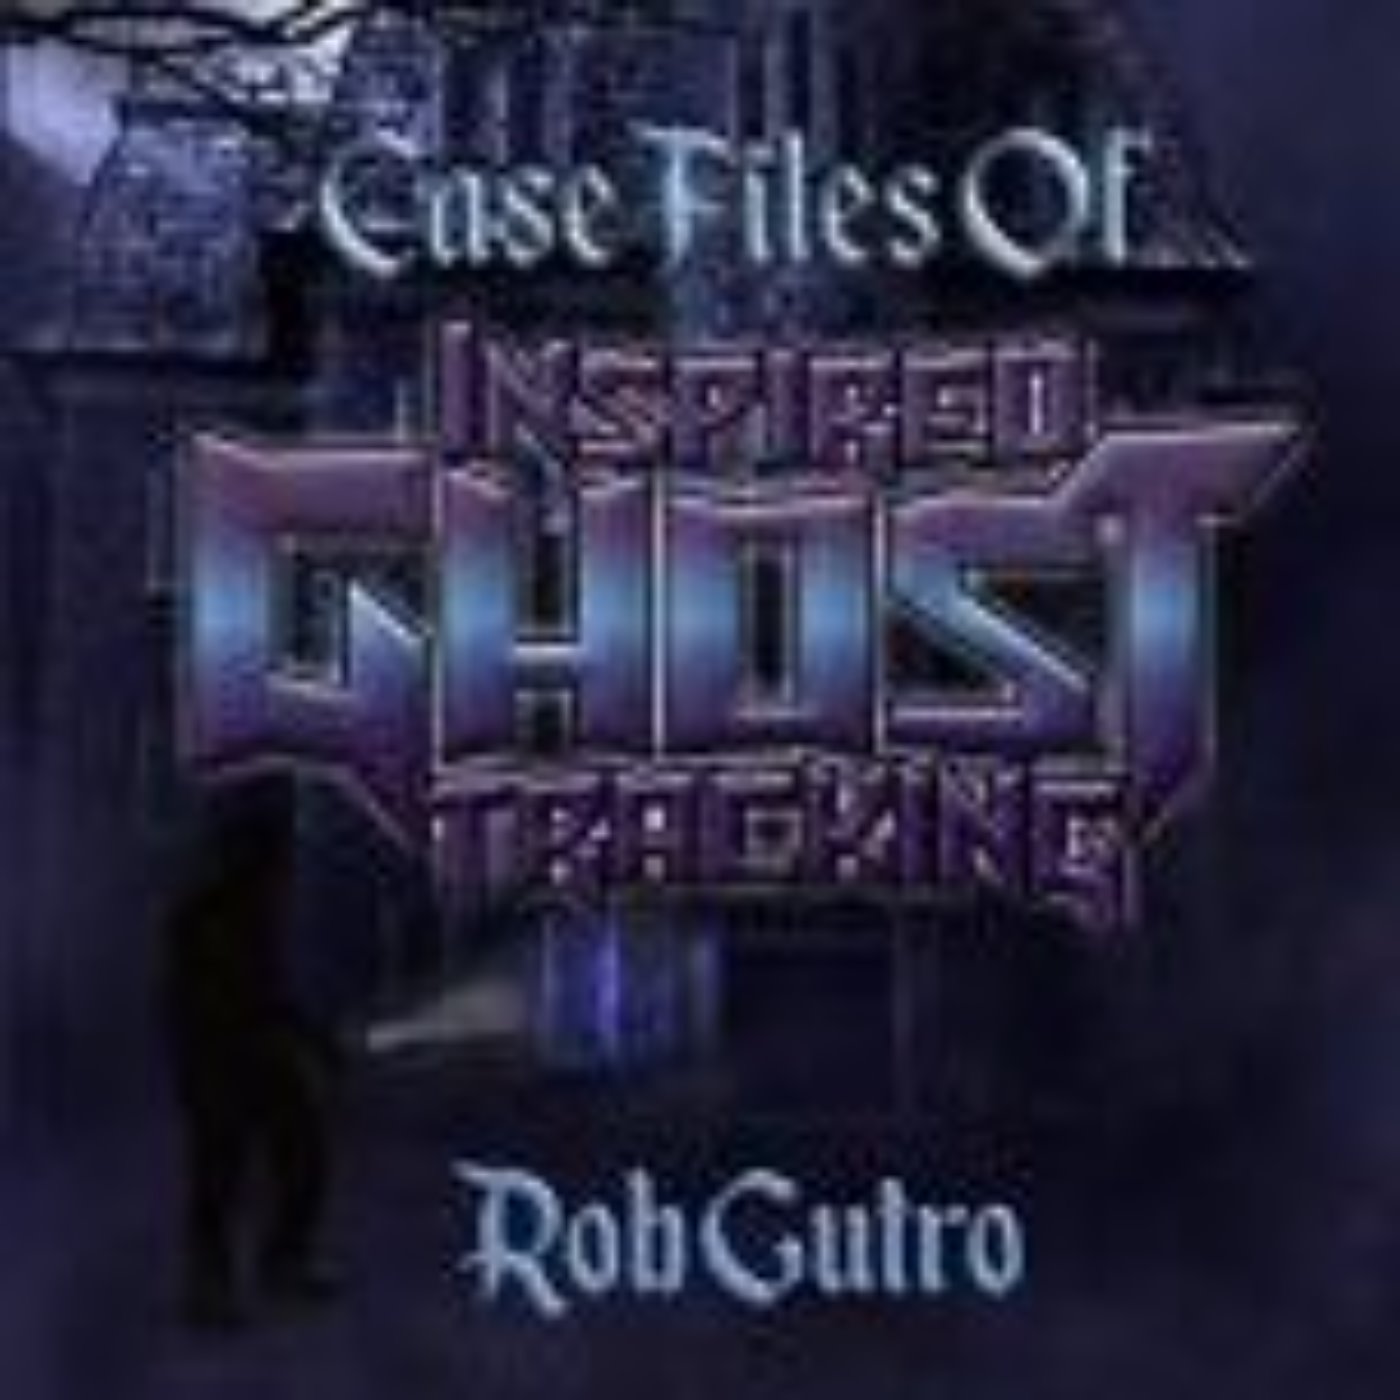 cover art for CASE FILES OF INSPIRED GHOST TRACKING- ROB GUTRO